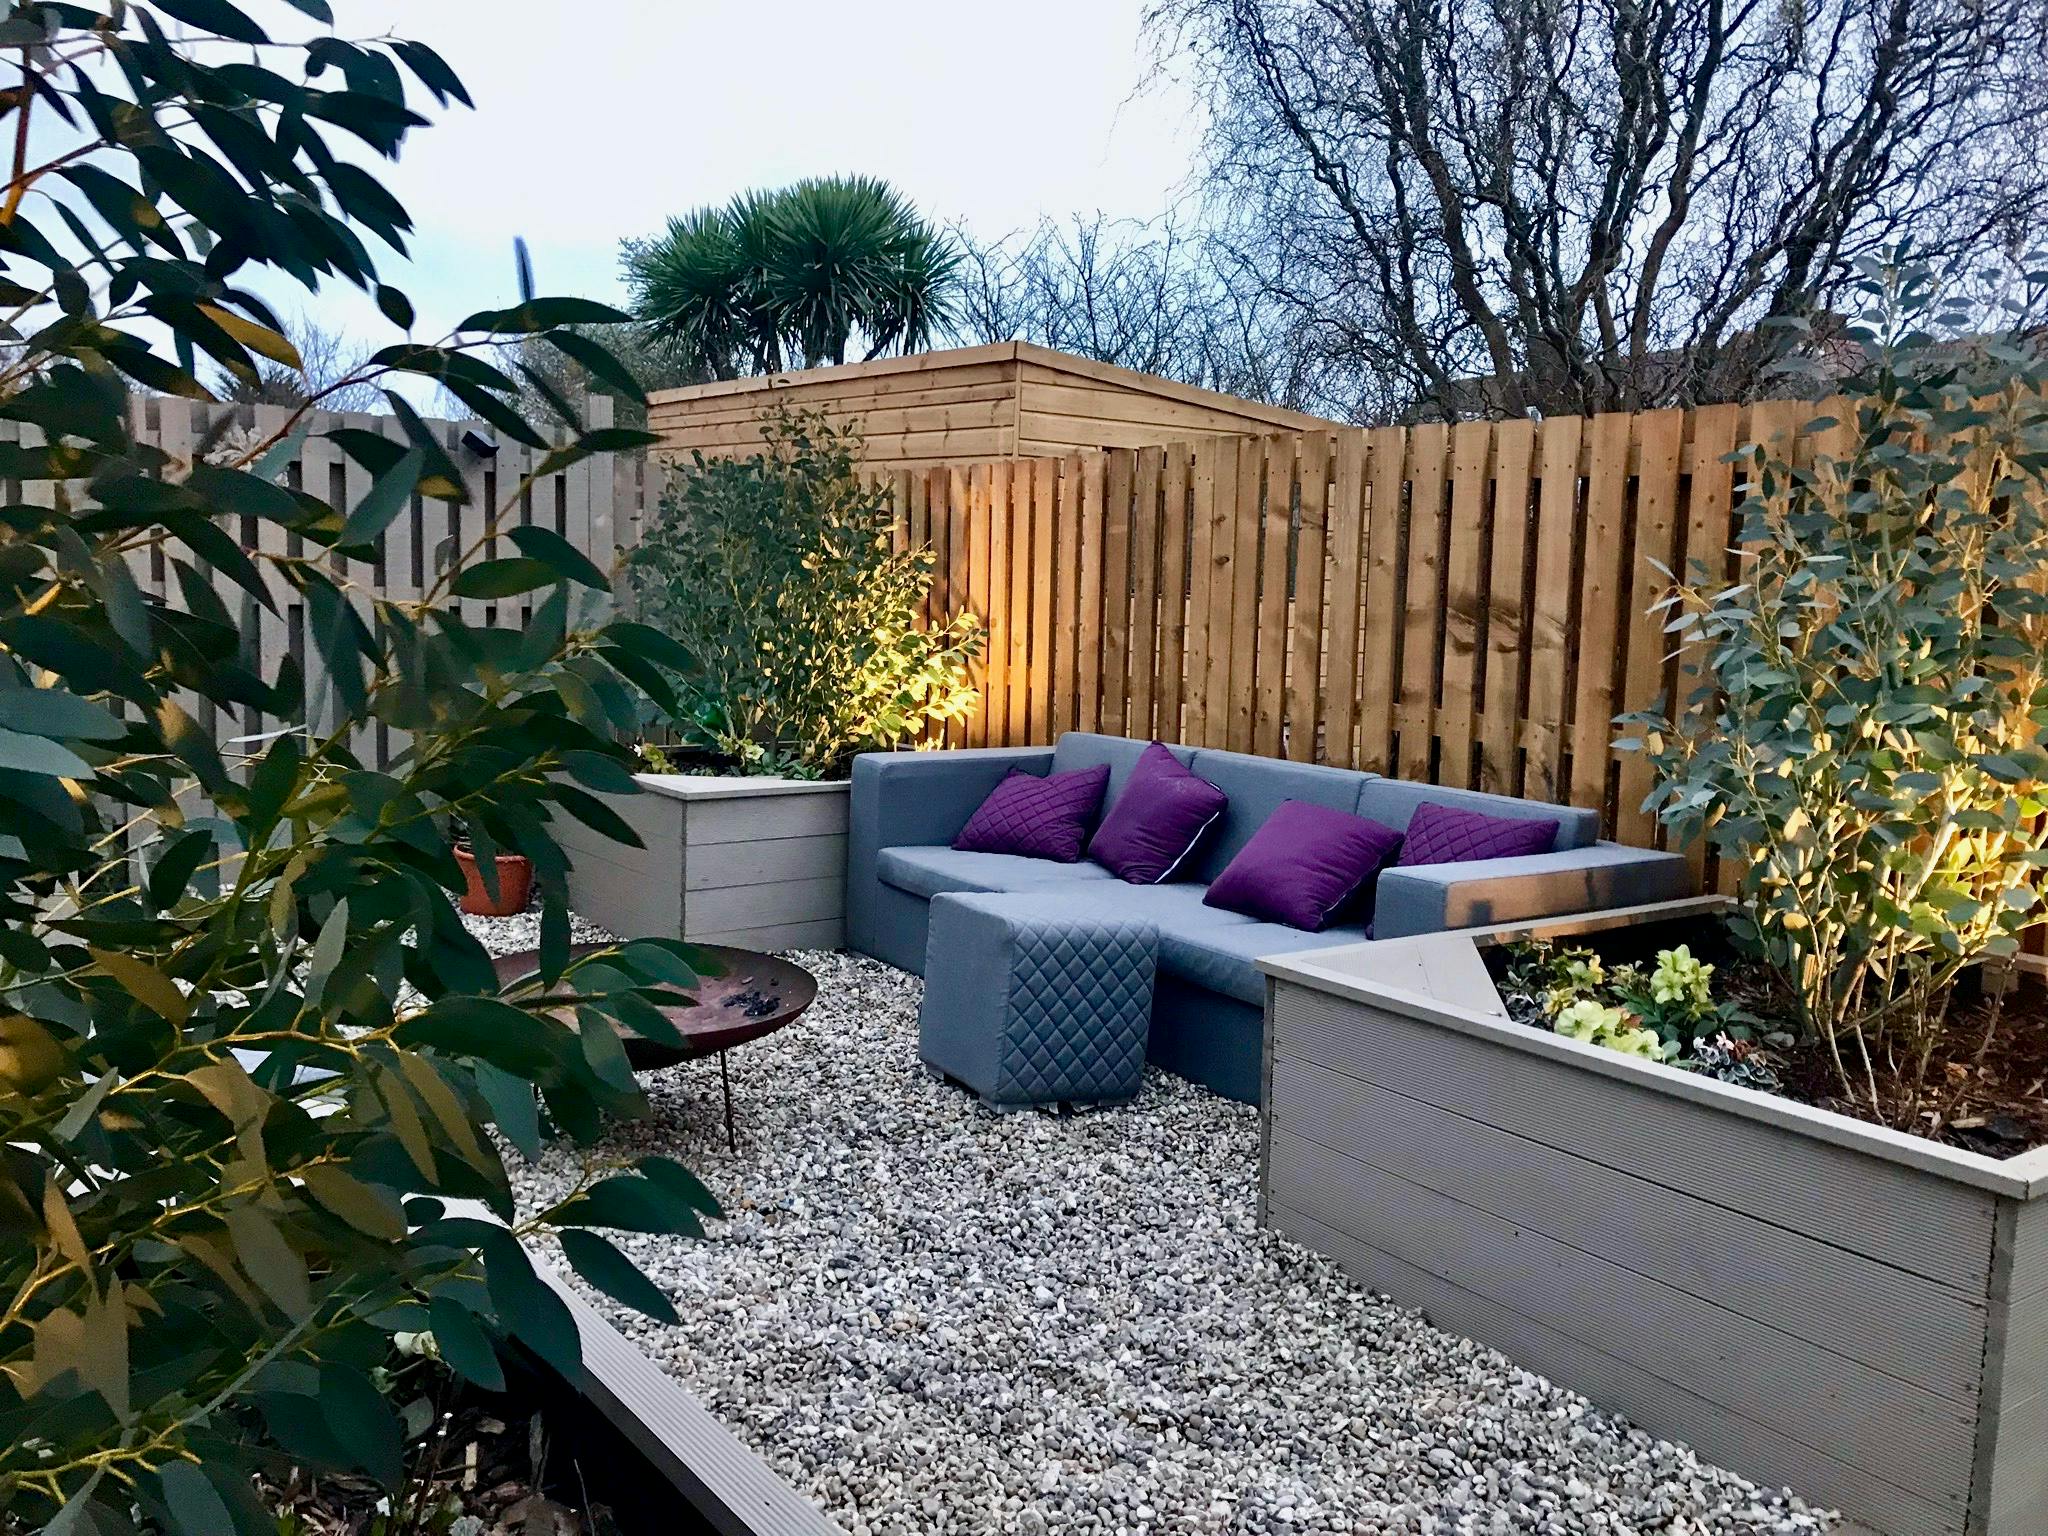 Garden Fire Pit Area with Planters and Outdoor quick dry Sofas